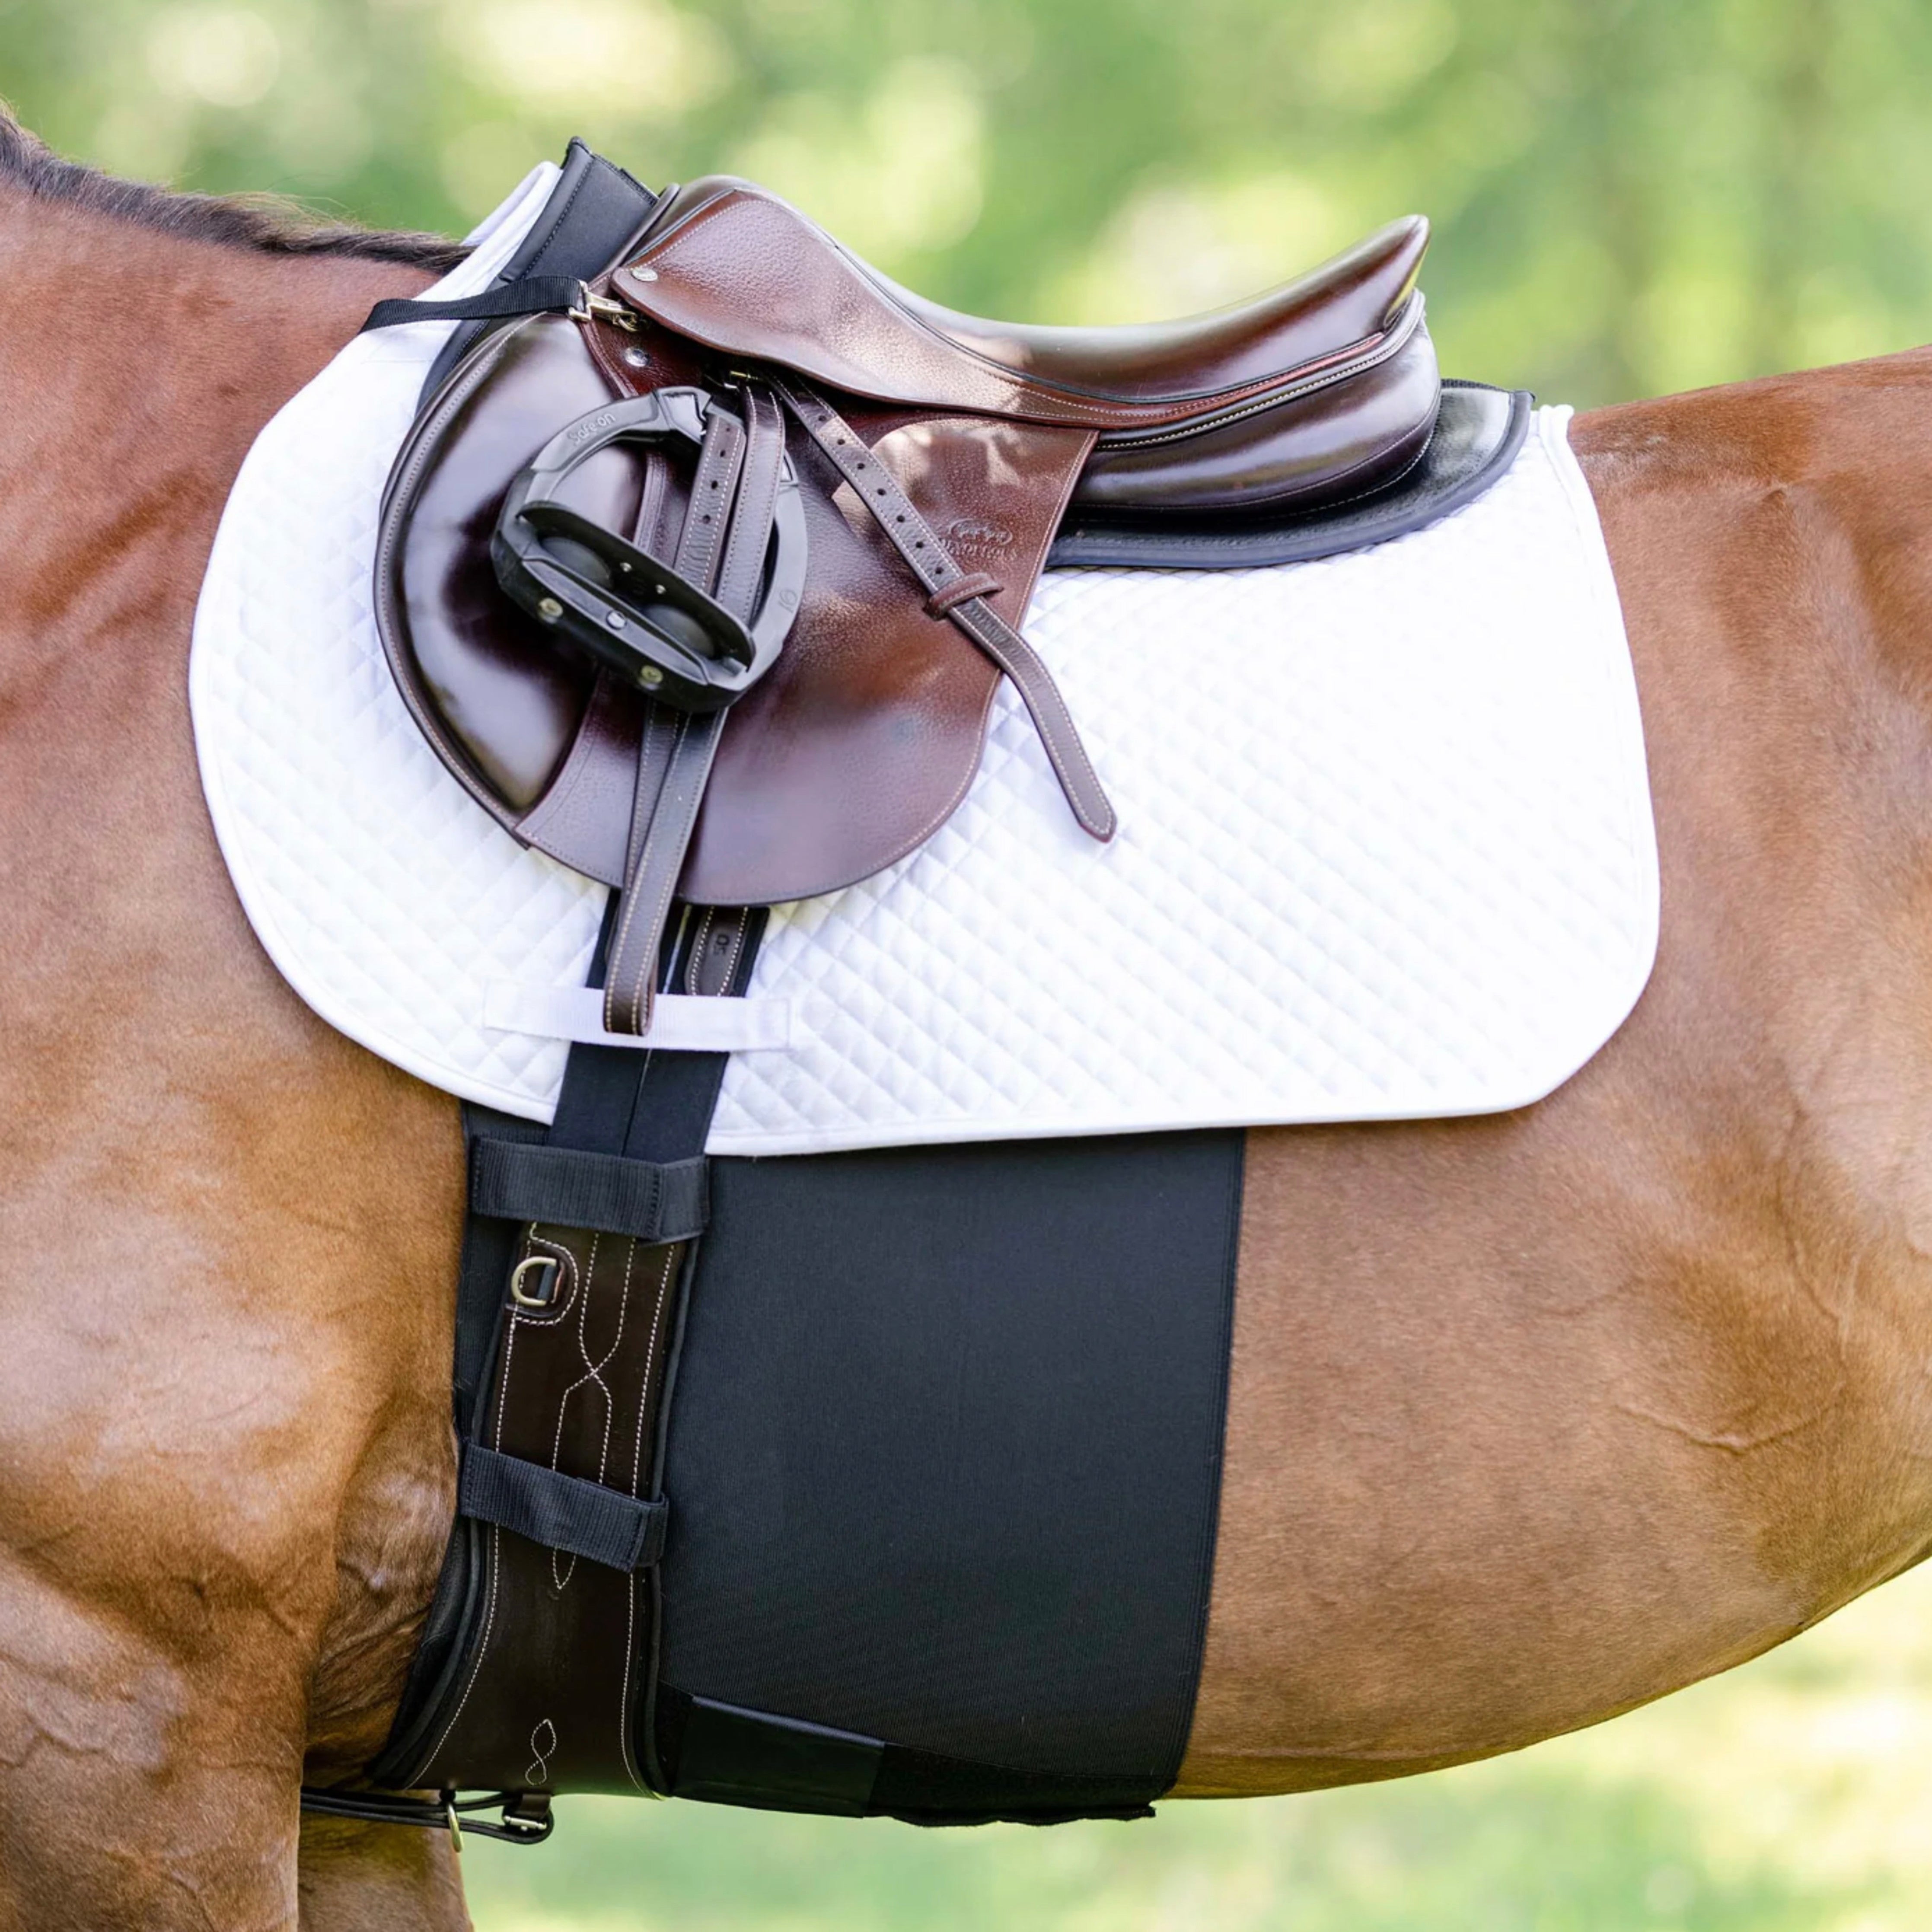 EquiFit Belly Band